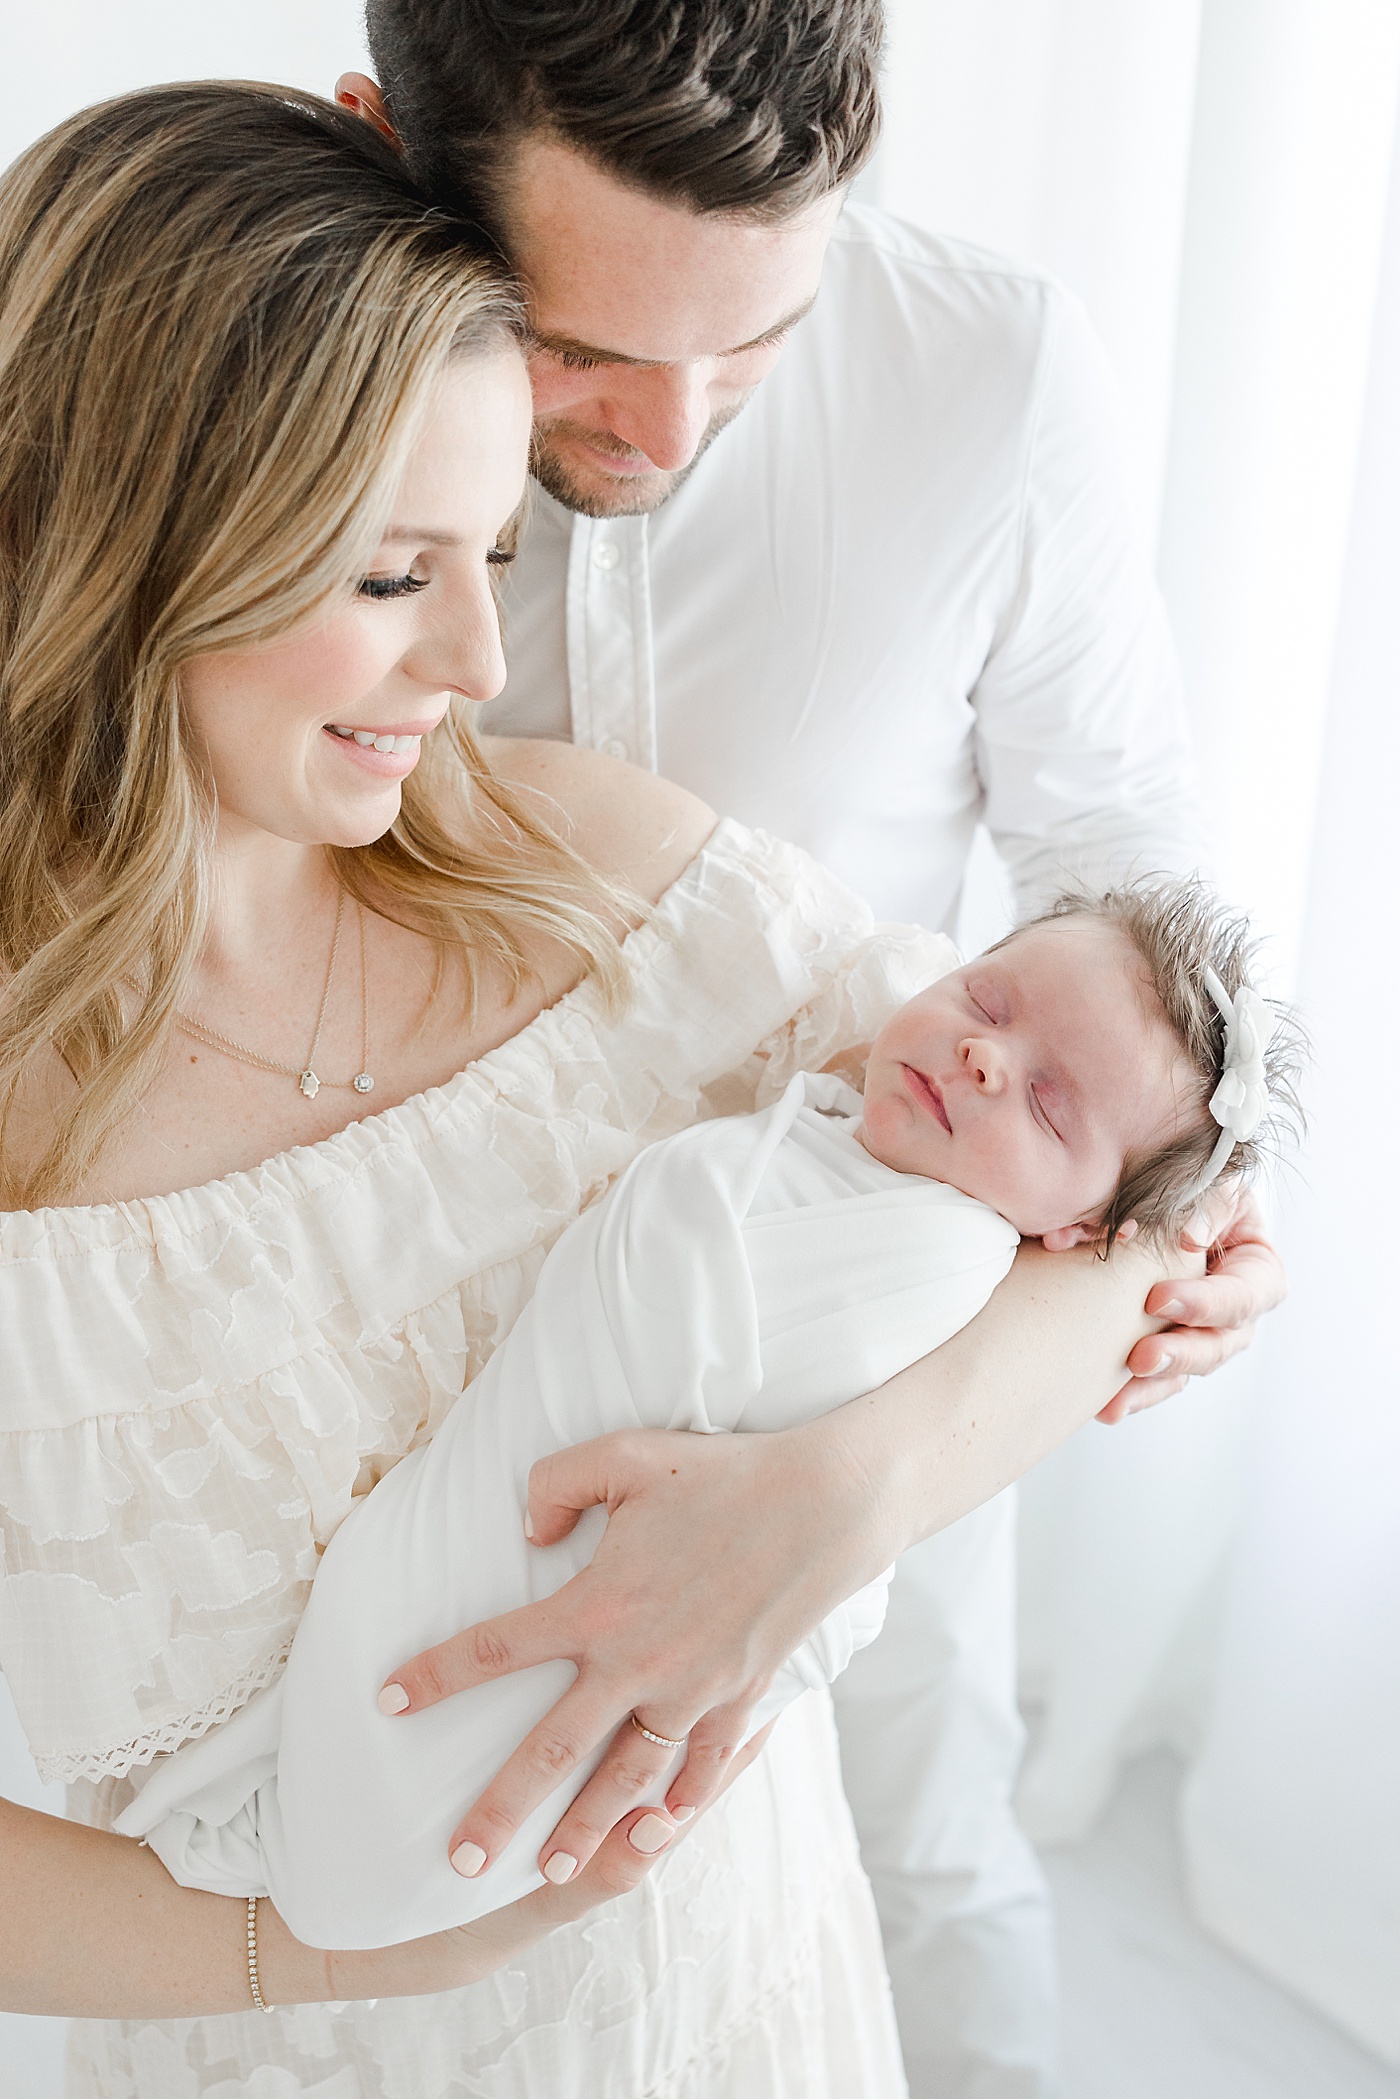 Studio newborn session for first-time parents and baby girl | Kristin Wood Photography